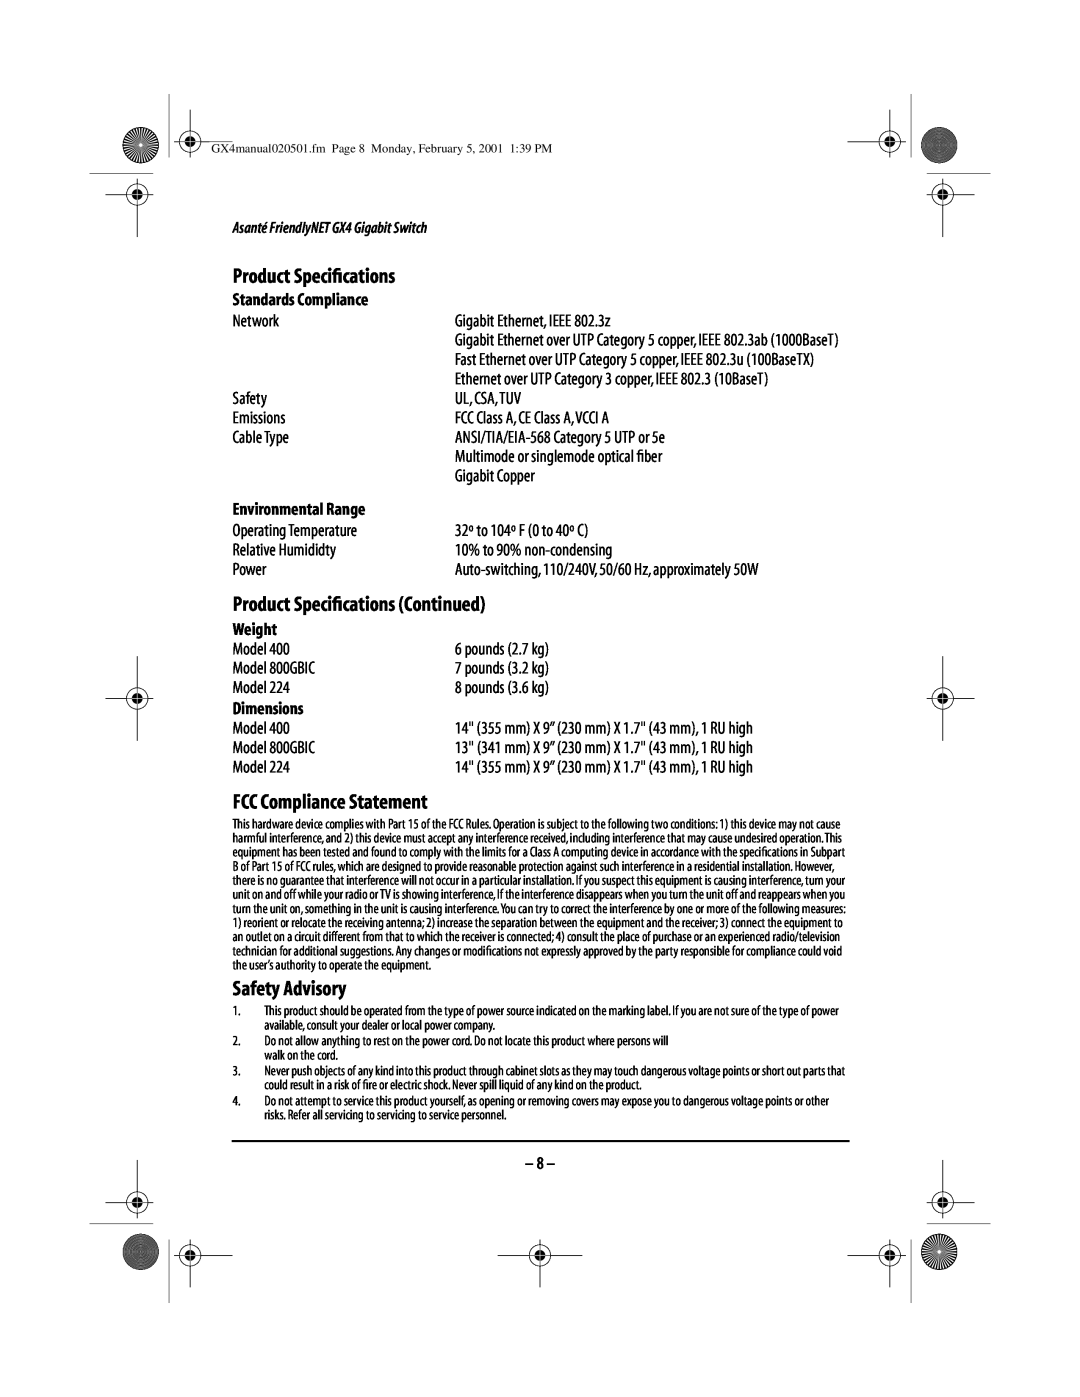 Asante Technologies GX4-800GBIC user manual Product Speciﬁcations Continued, FCC Compliance Statement, Safety Advisory 